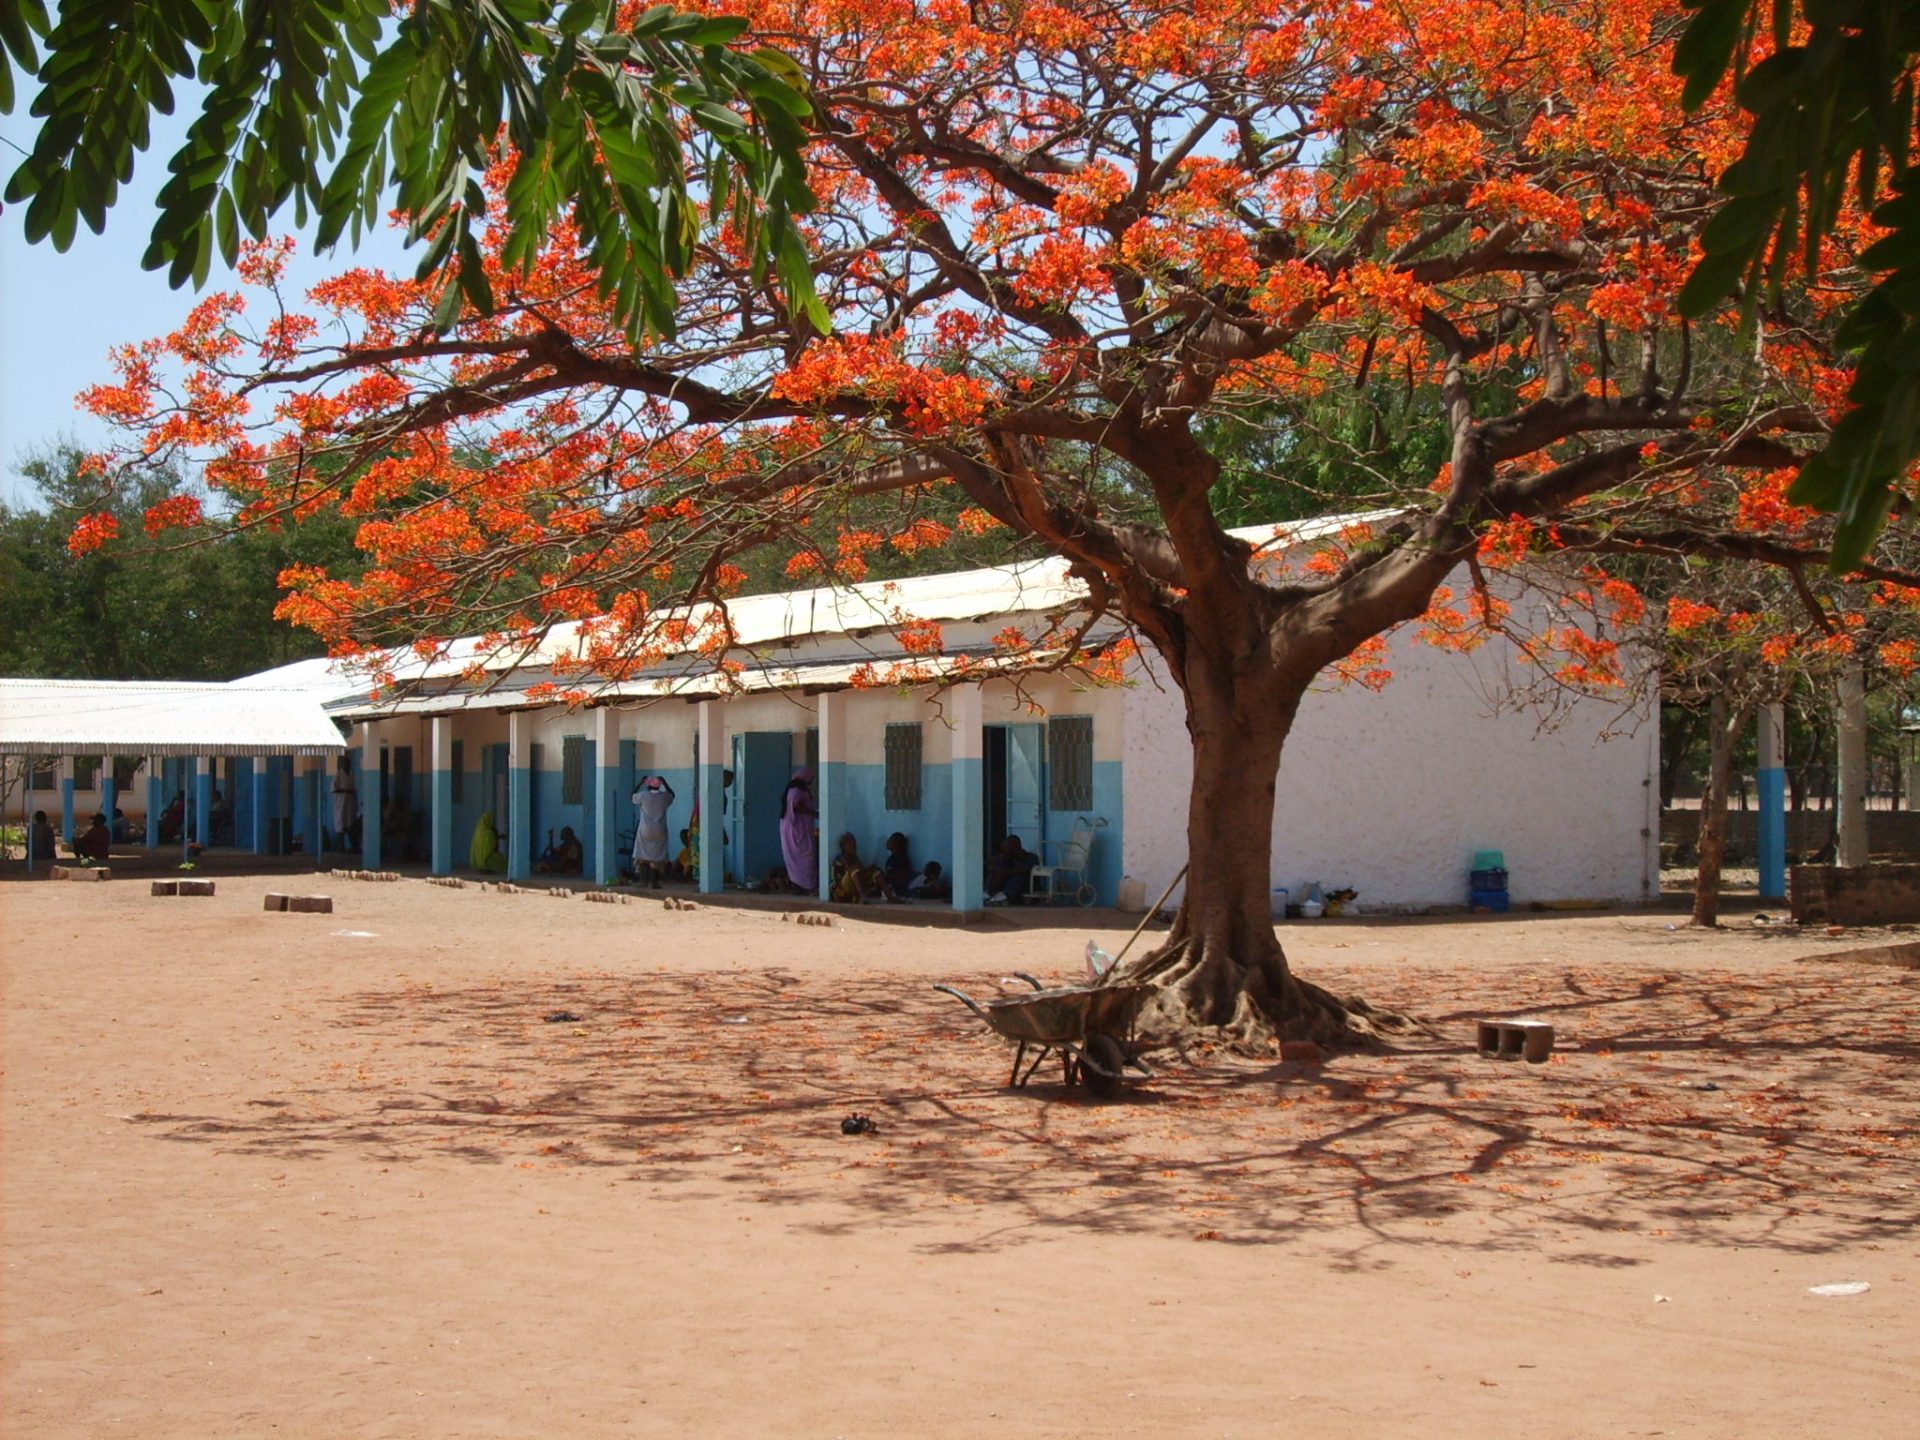 St. Joseph Hospital in Bébédjia, Chad, is a refuge for the local people, who have few other options.